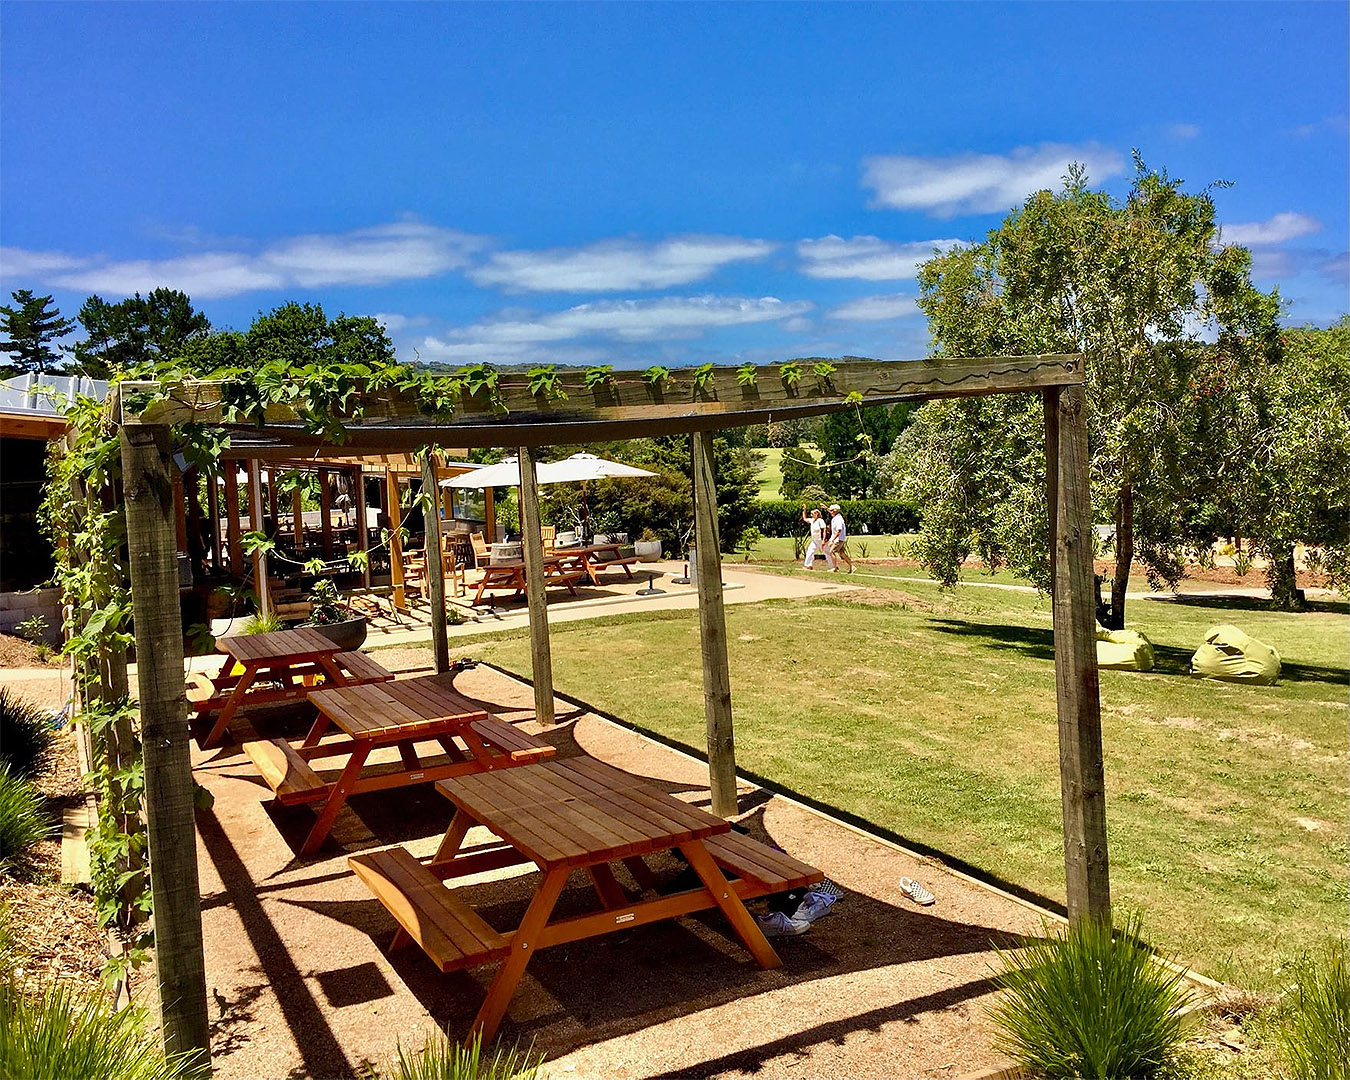 Picnic tables sit amongst the vines under an impossibly blue sky at The Heke on Waiheke.